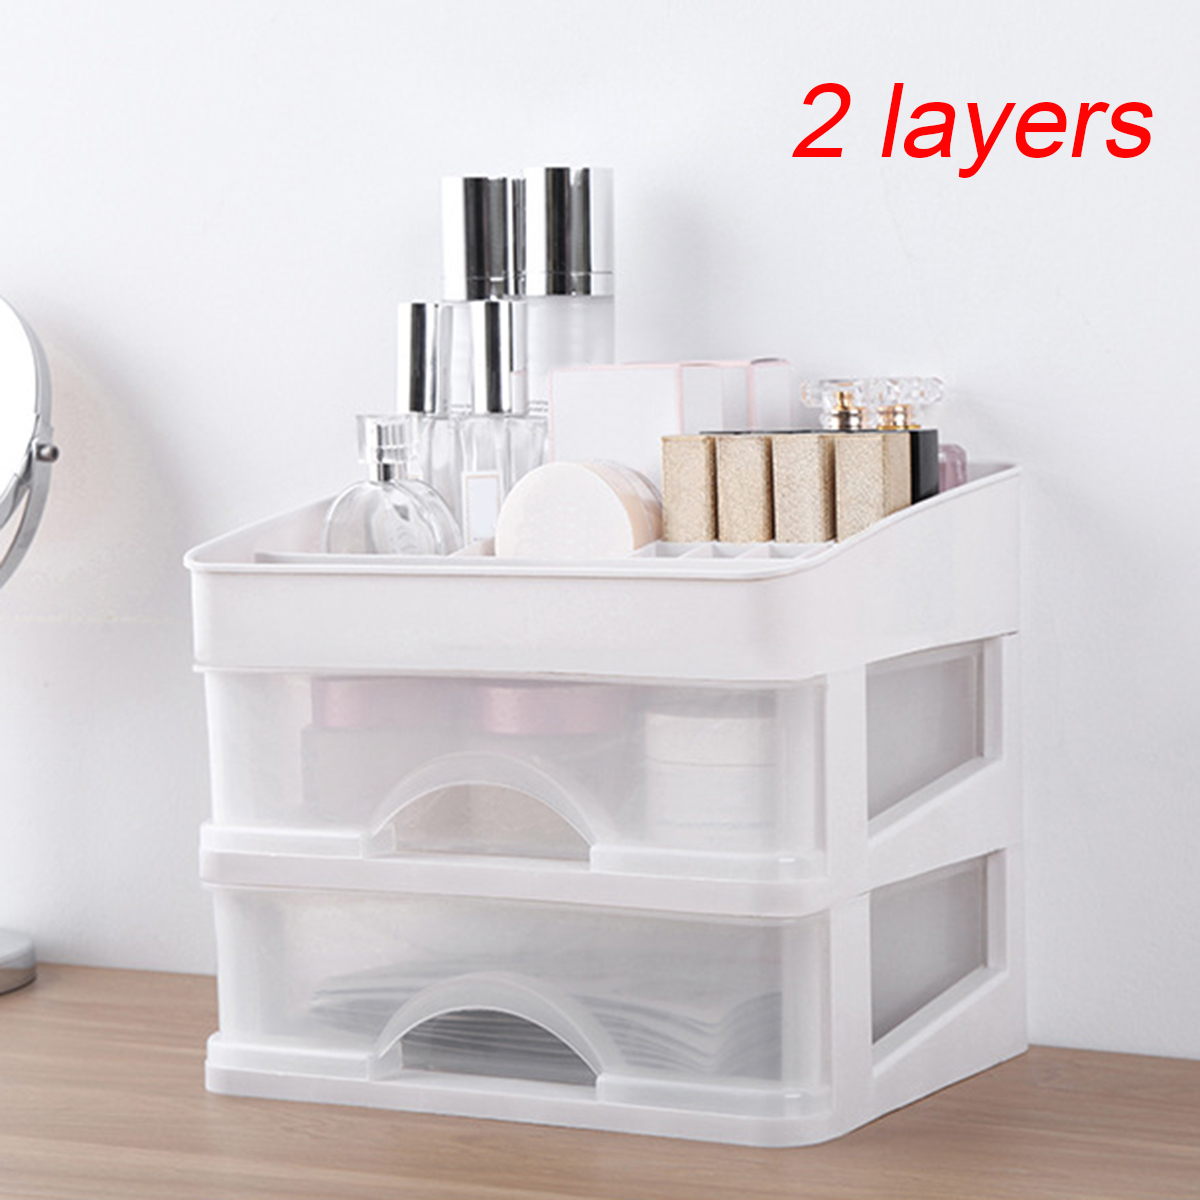 Plastic-Cosmetic-Drawer-Makeup-Organizer-Storage-Box-Container-Holder-Desktop-with-Drawer-1708816-4